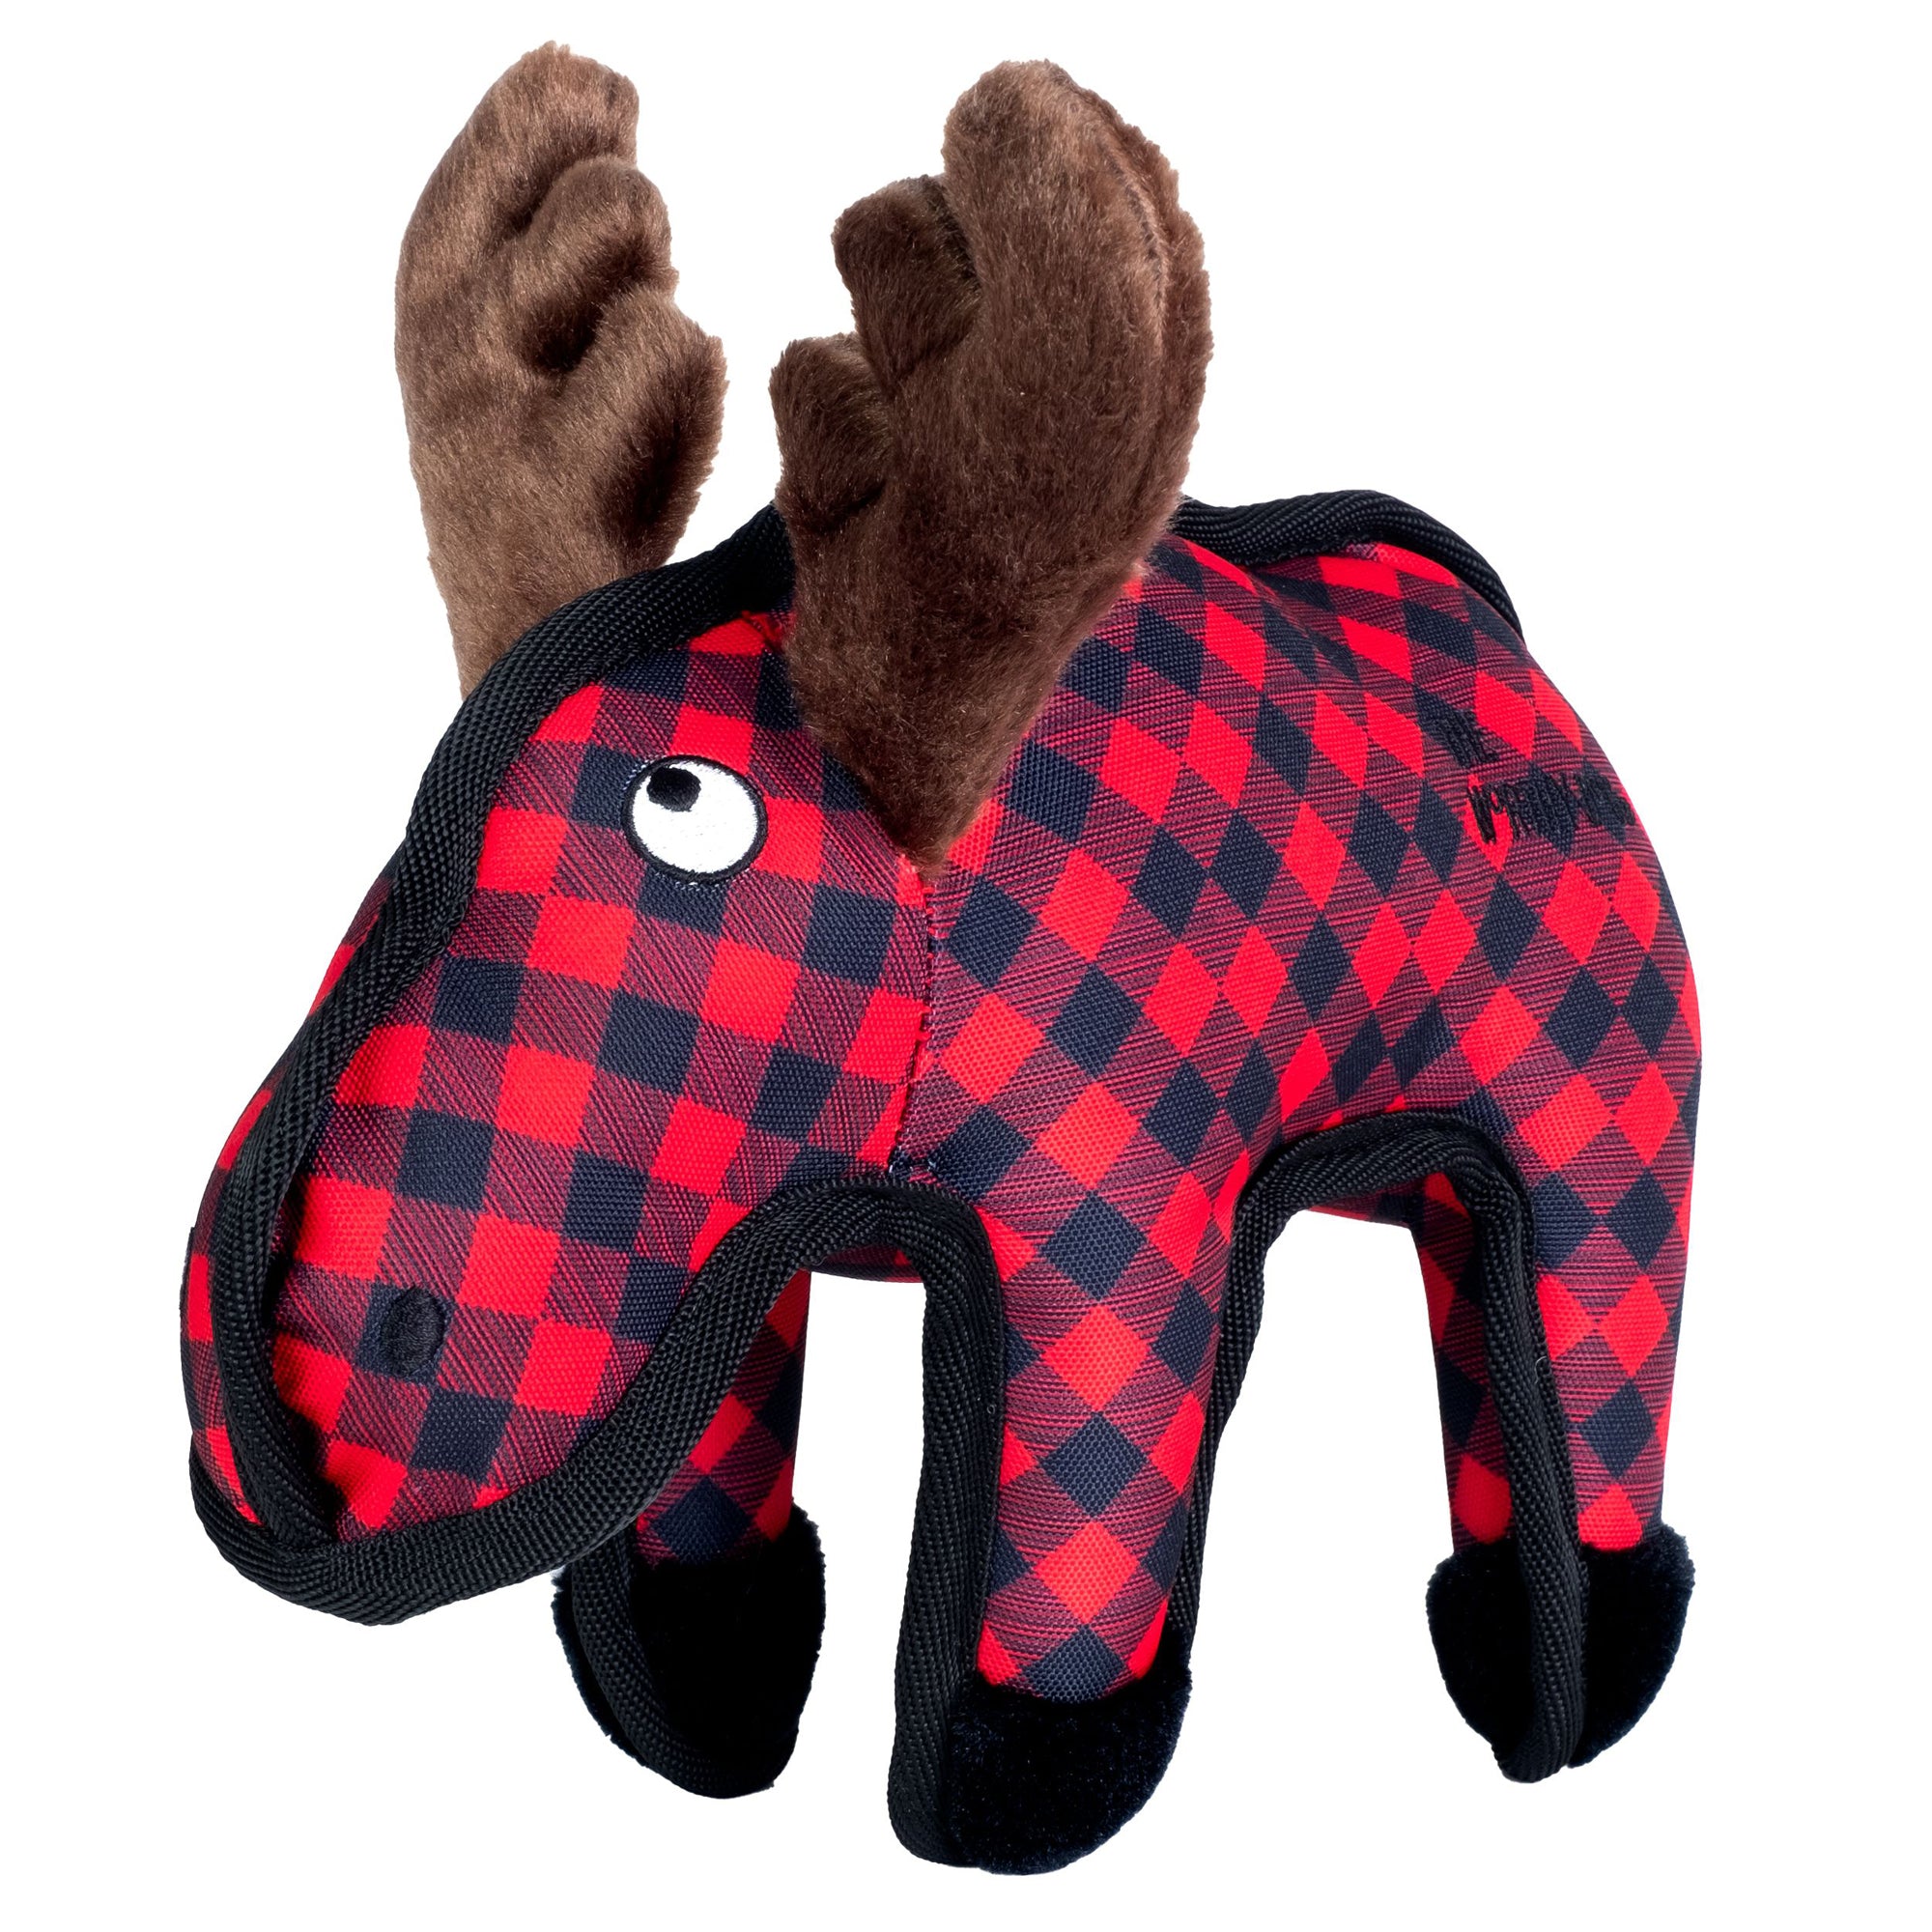 The Worthy Dog Moose Red Dog Toy